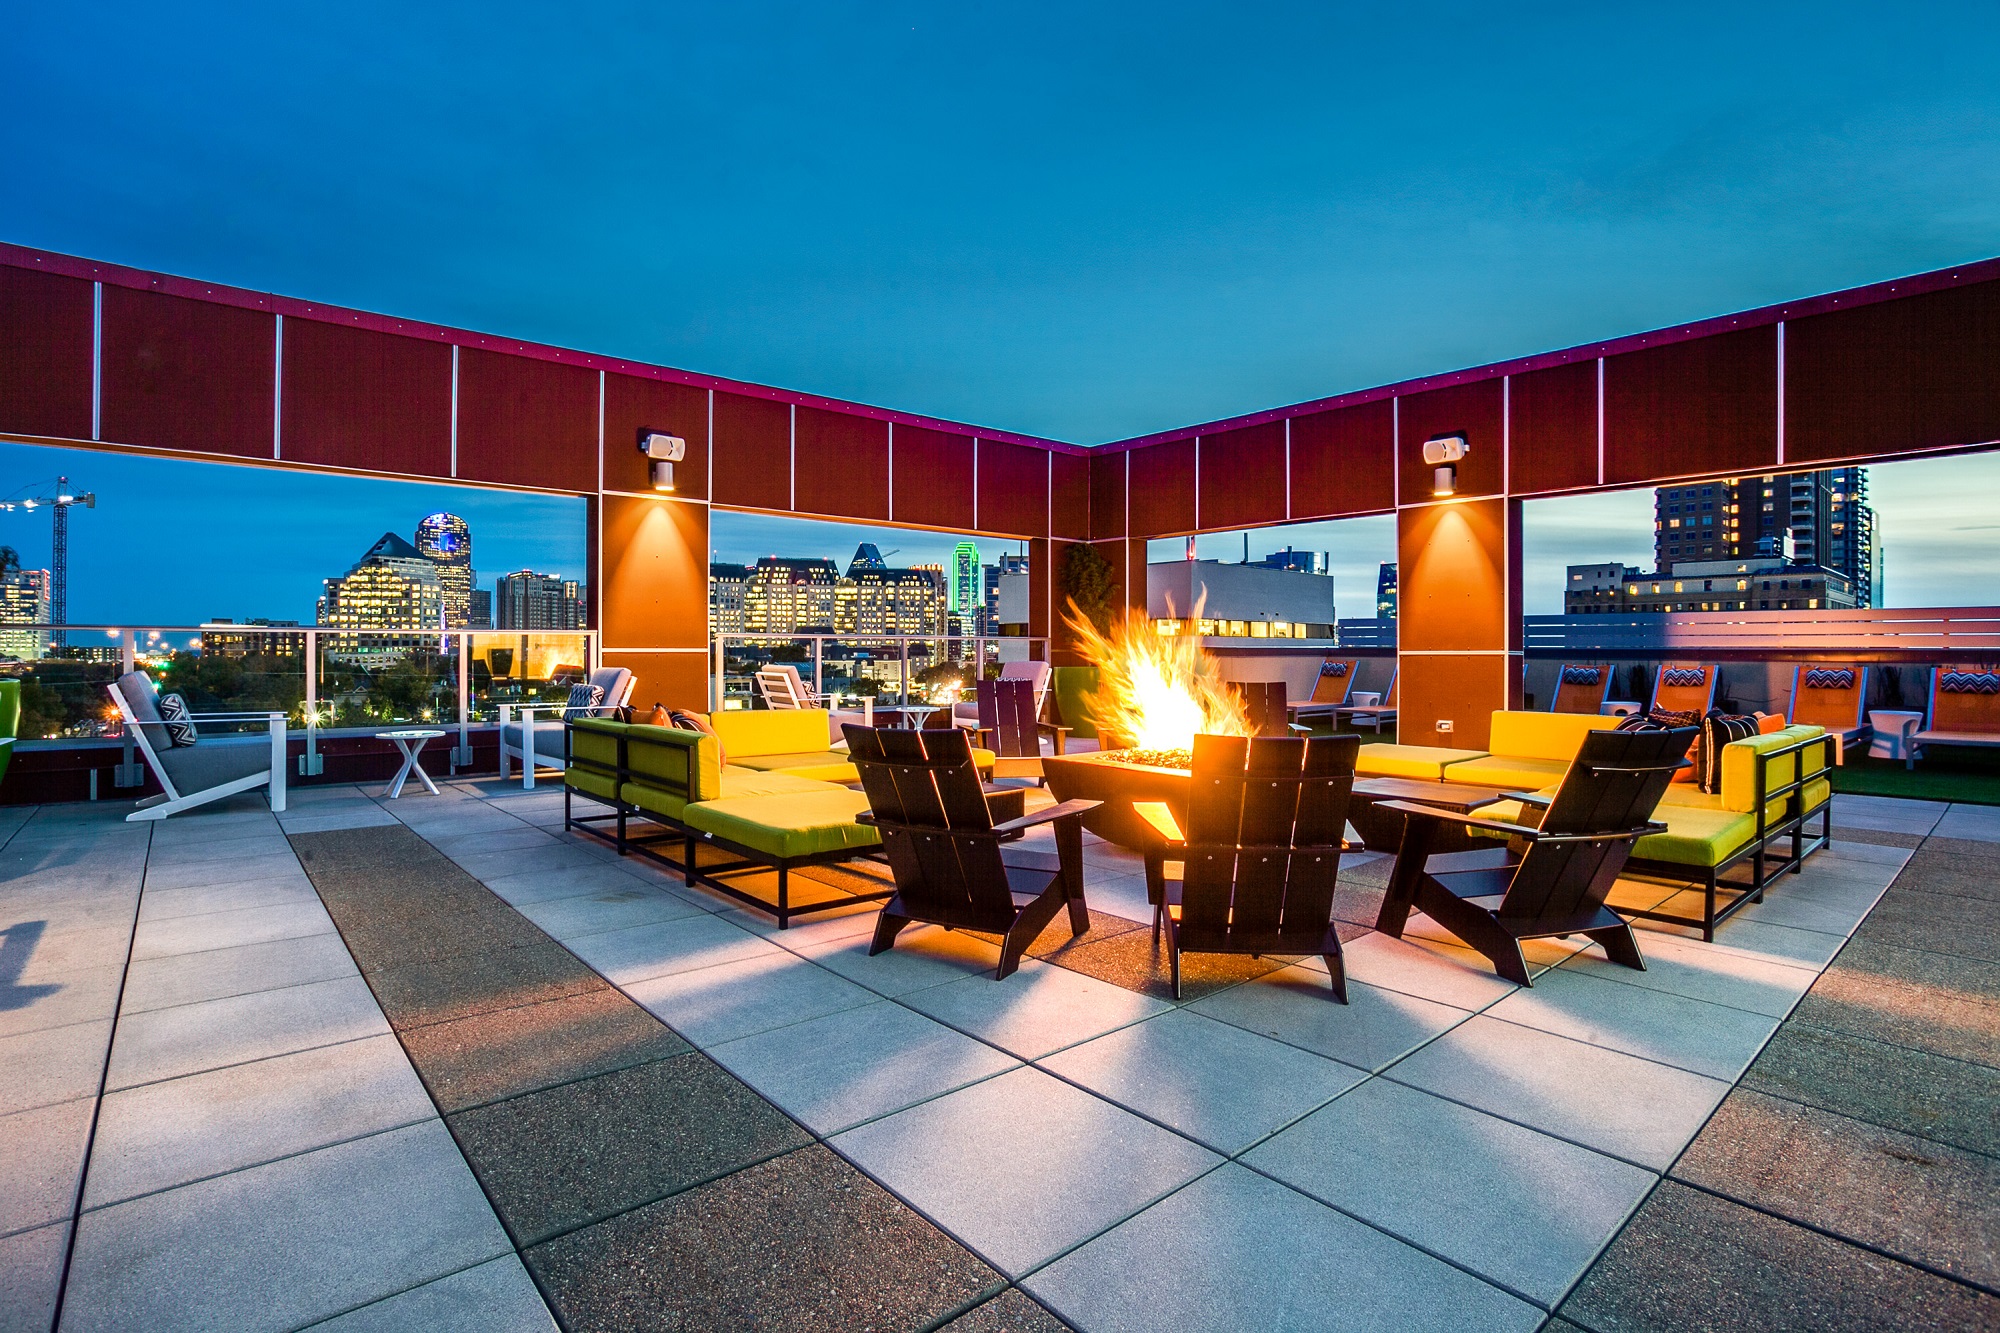 Evening shot of fire pit lounge with lighting, sectional seating and chairs/tables